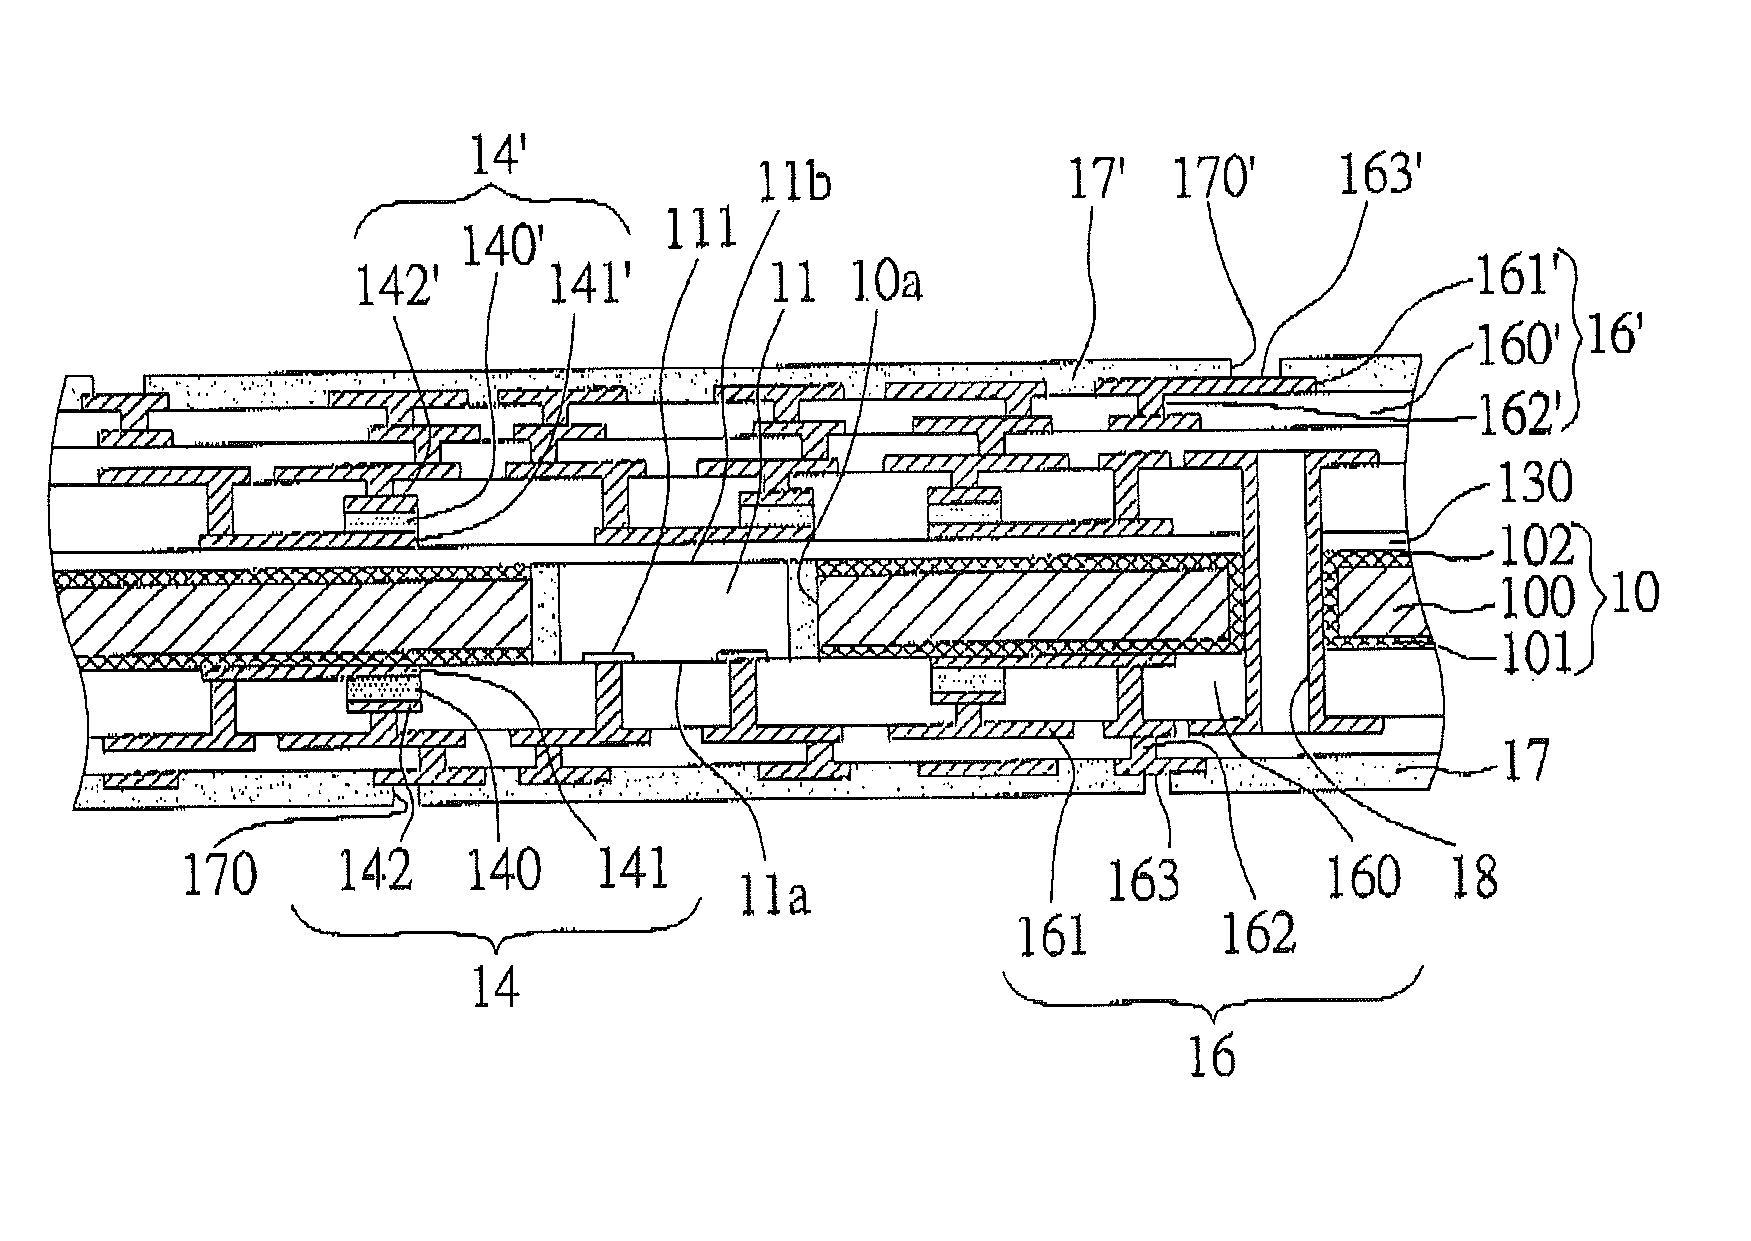 Circuit board structure having electronic components integrated therein